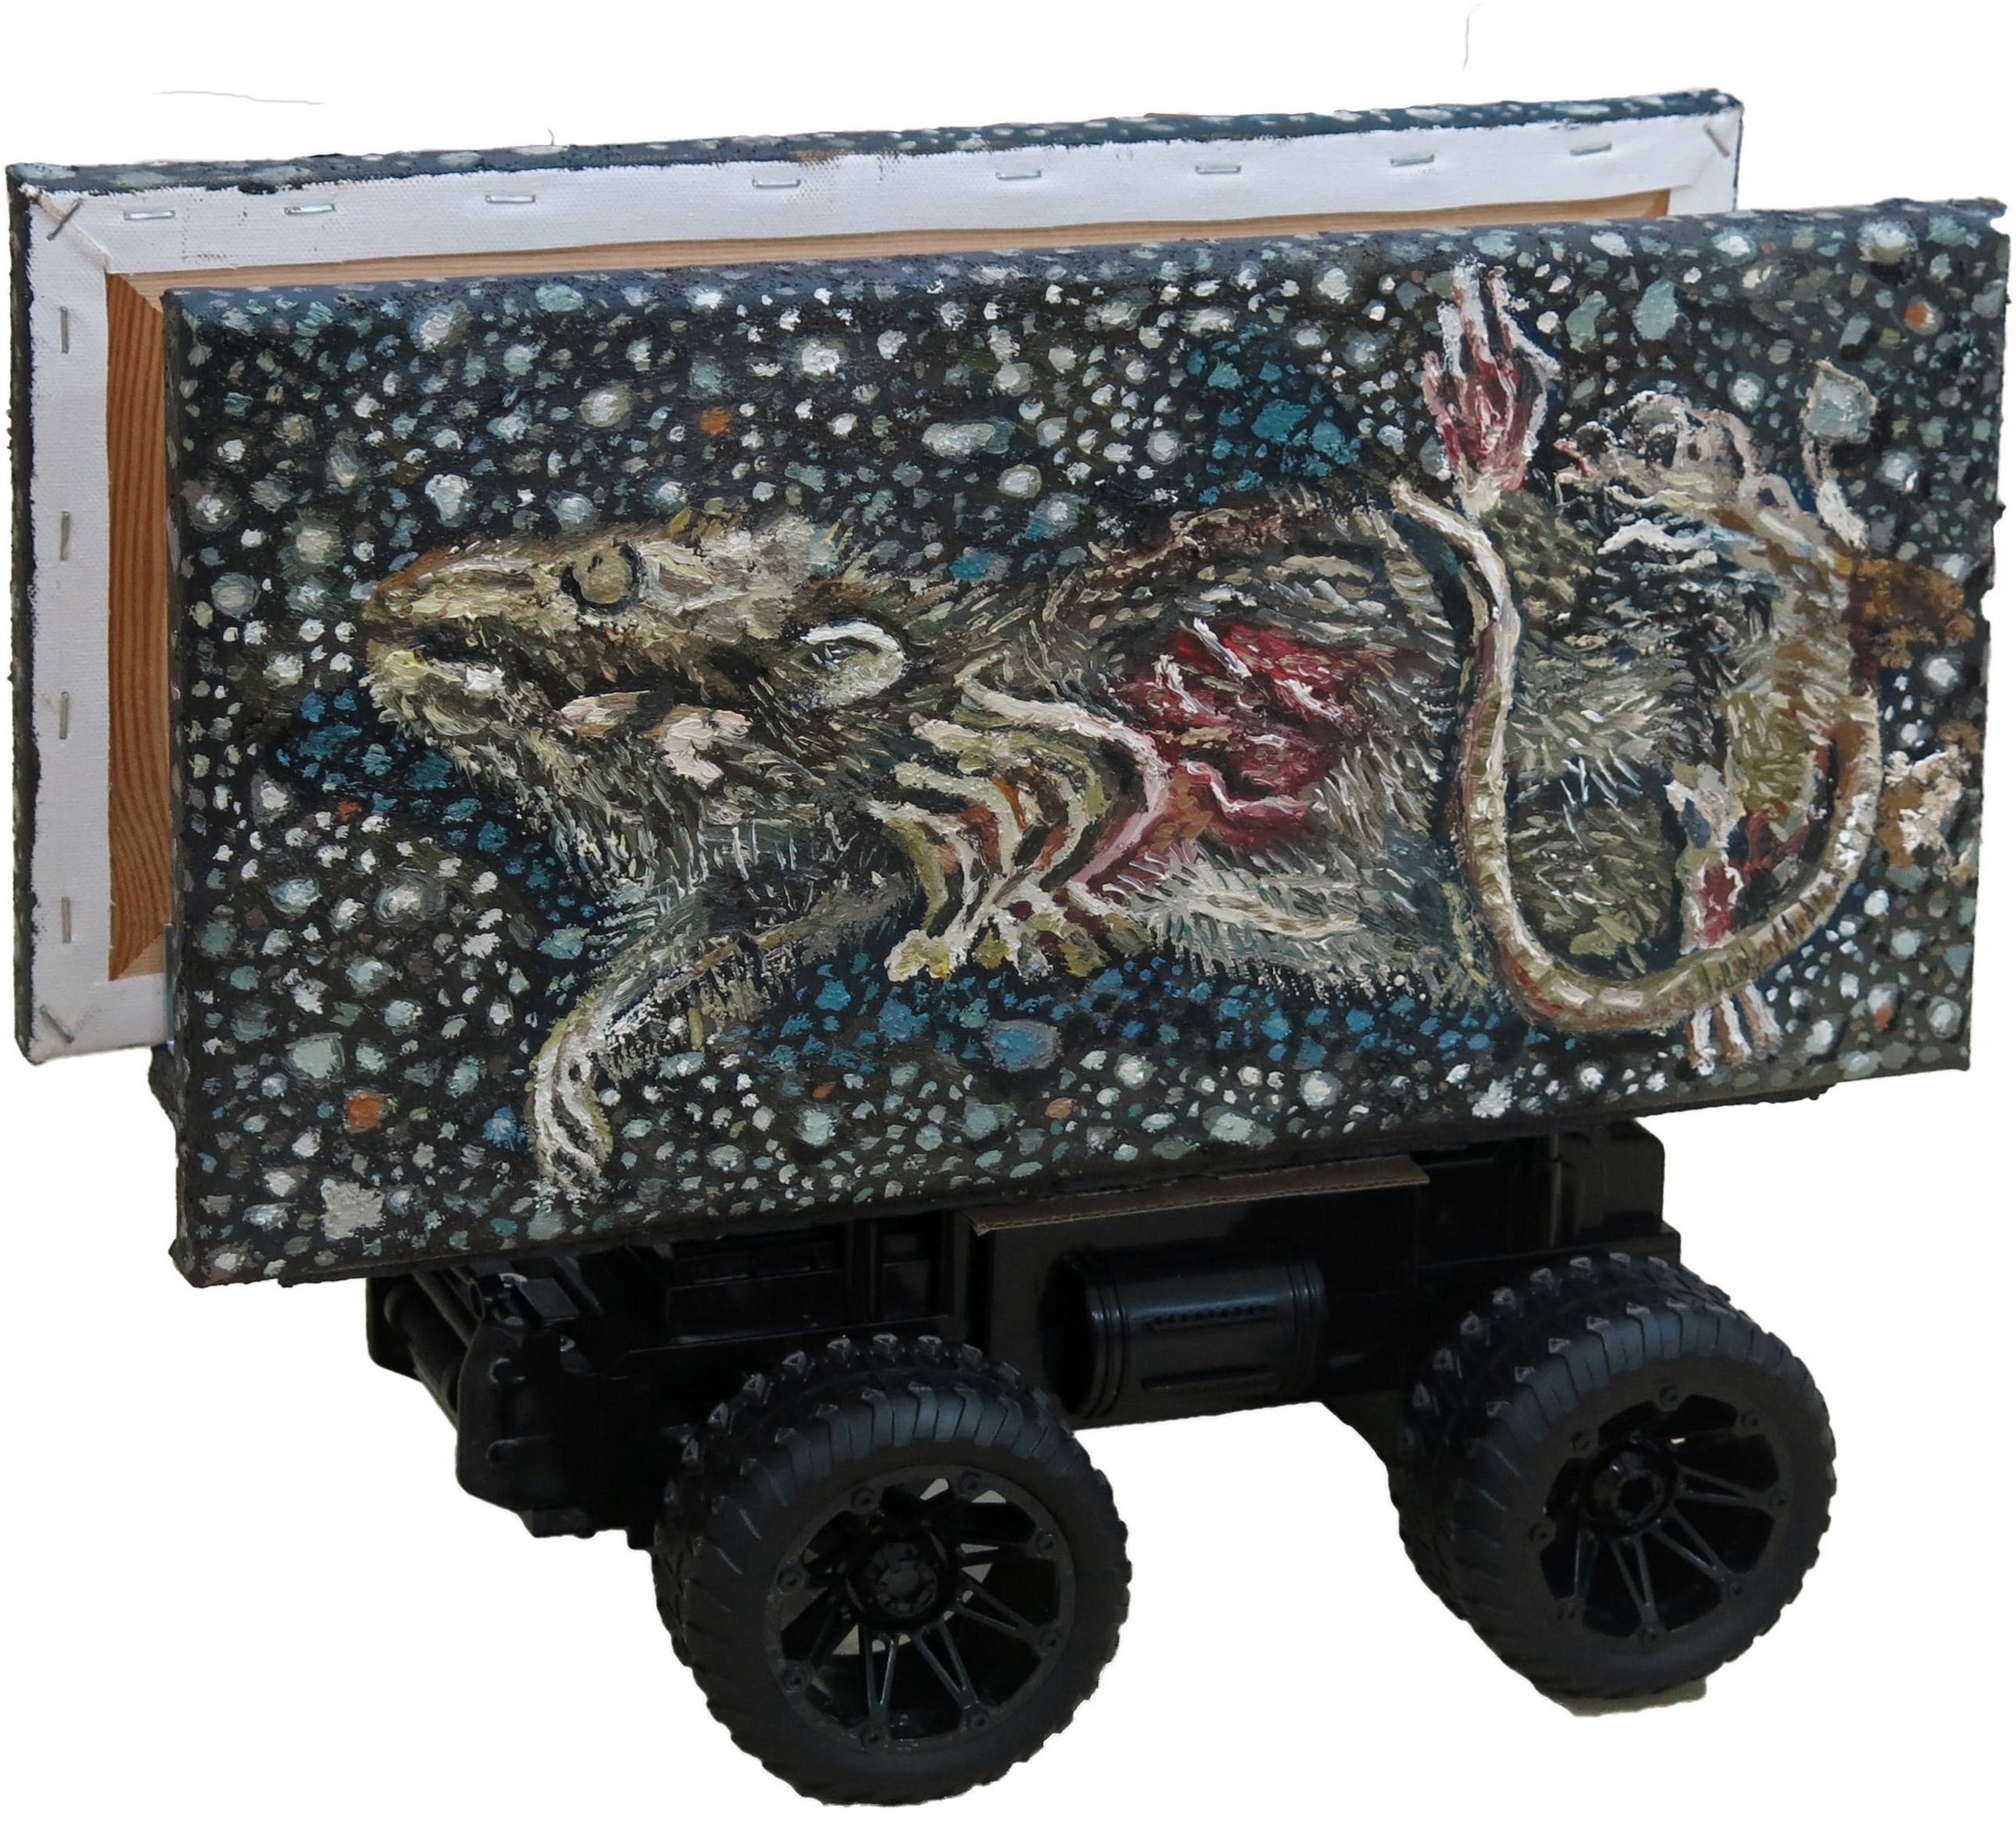   Reanimated Dead Rat   2023  Oil on canvas, wood, remote control toy car and remote control  H32.5 x W40.5 x D21 cm (left) 